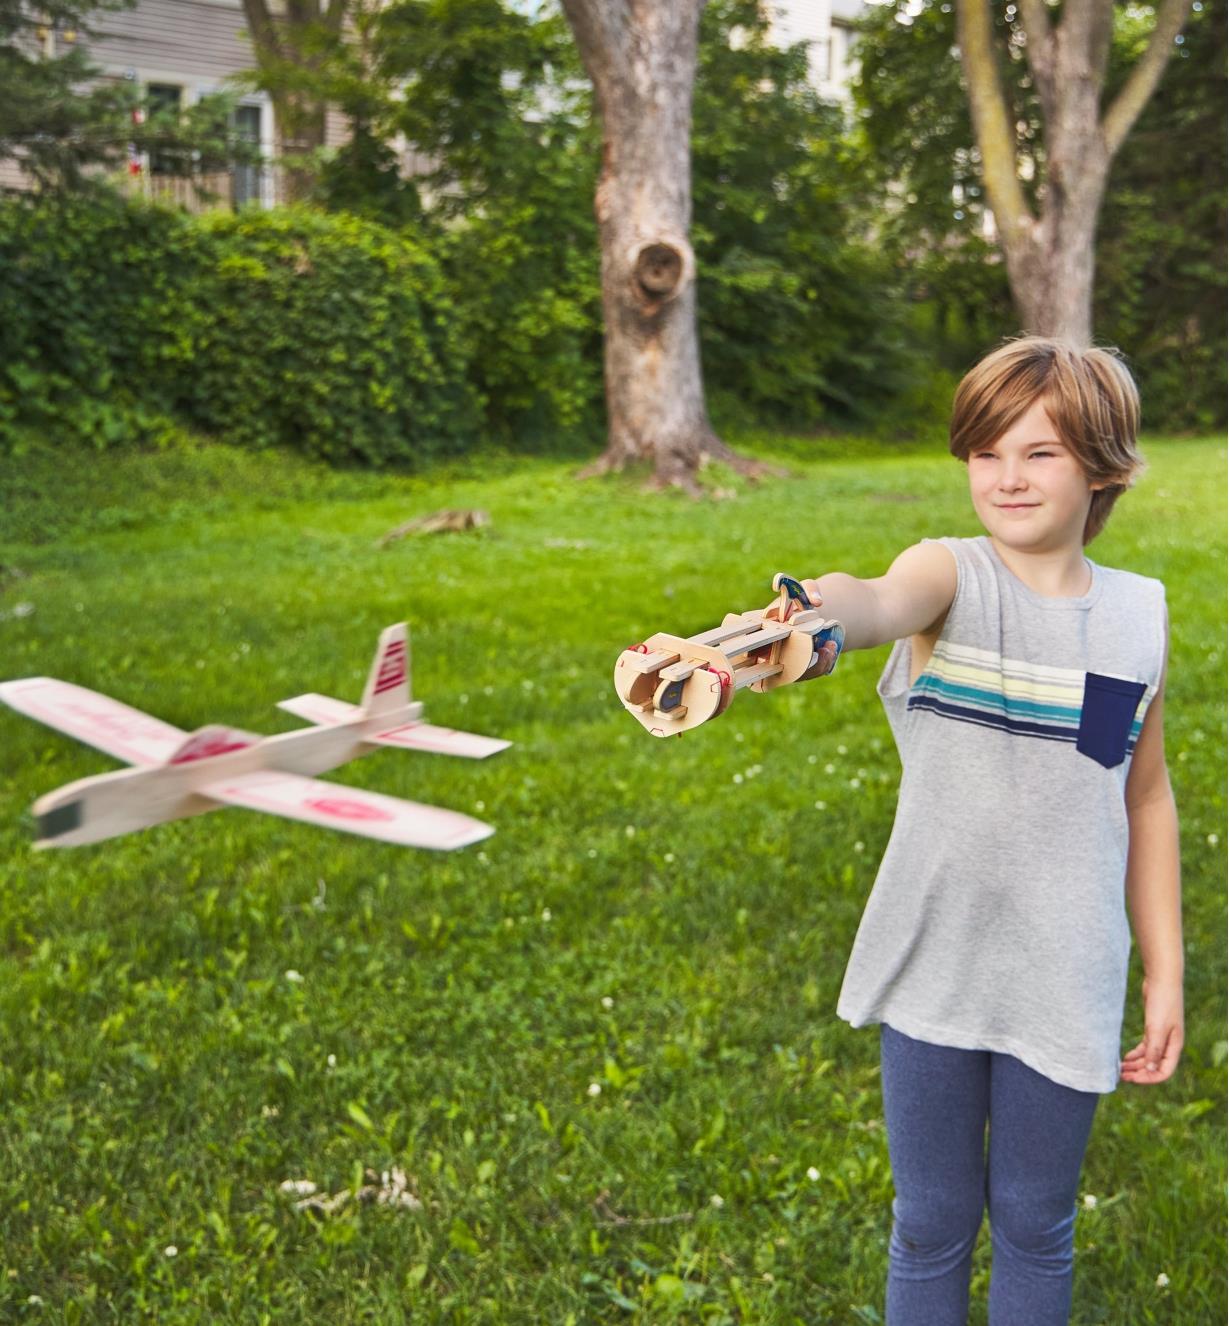 Launching a balsa wood glider from a paper airplane launcher